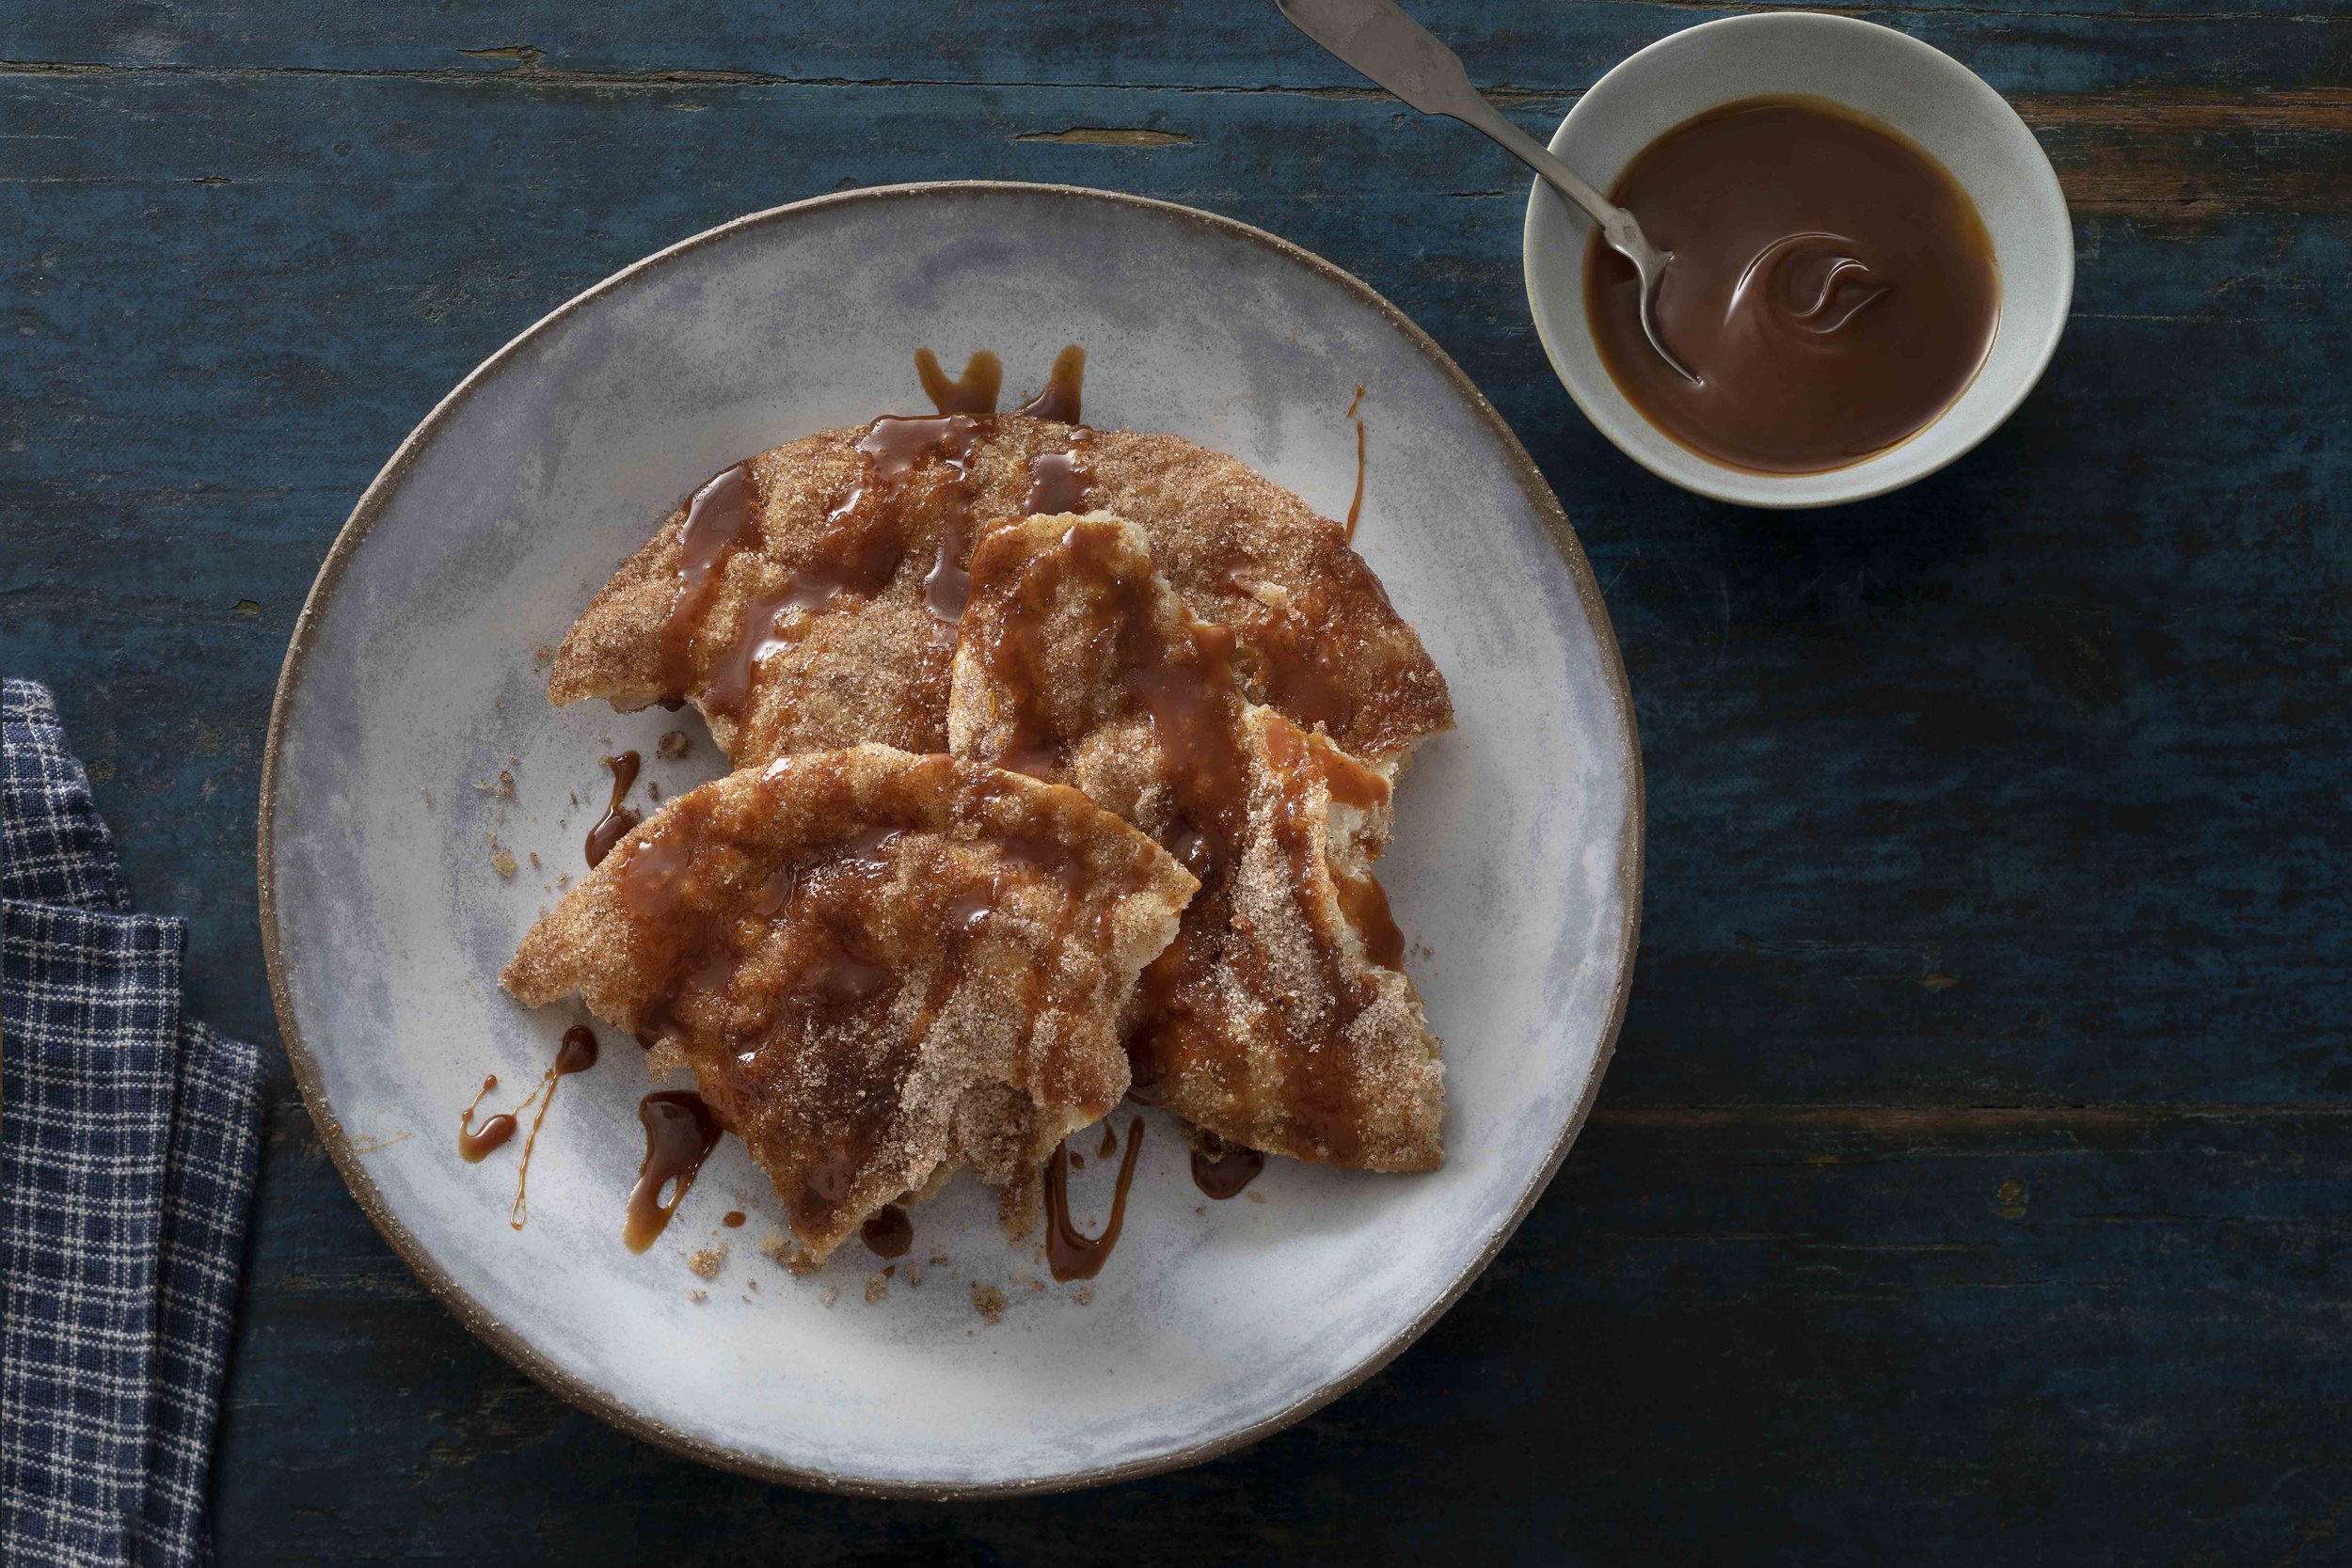  The only thing more joy-inducing than great Mexican food might be the  desserts. Cocina Mexicana offers a very popular Mexican sweet treat,  buñuelos (accompanied by a delicious cajeta caramel dipping sauce).  Other options include a decadent tres l